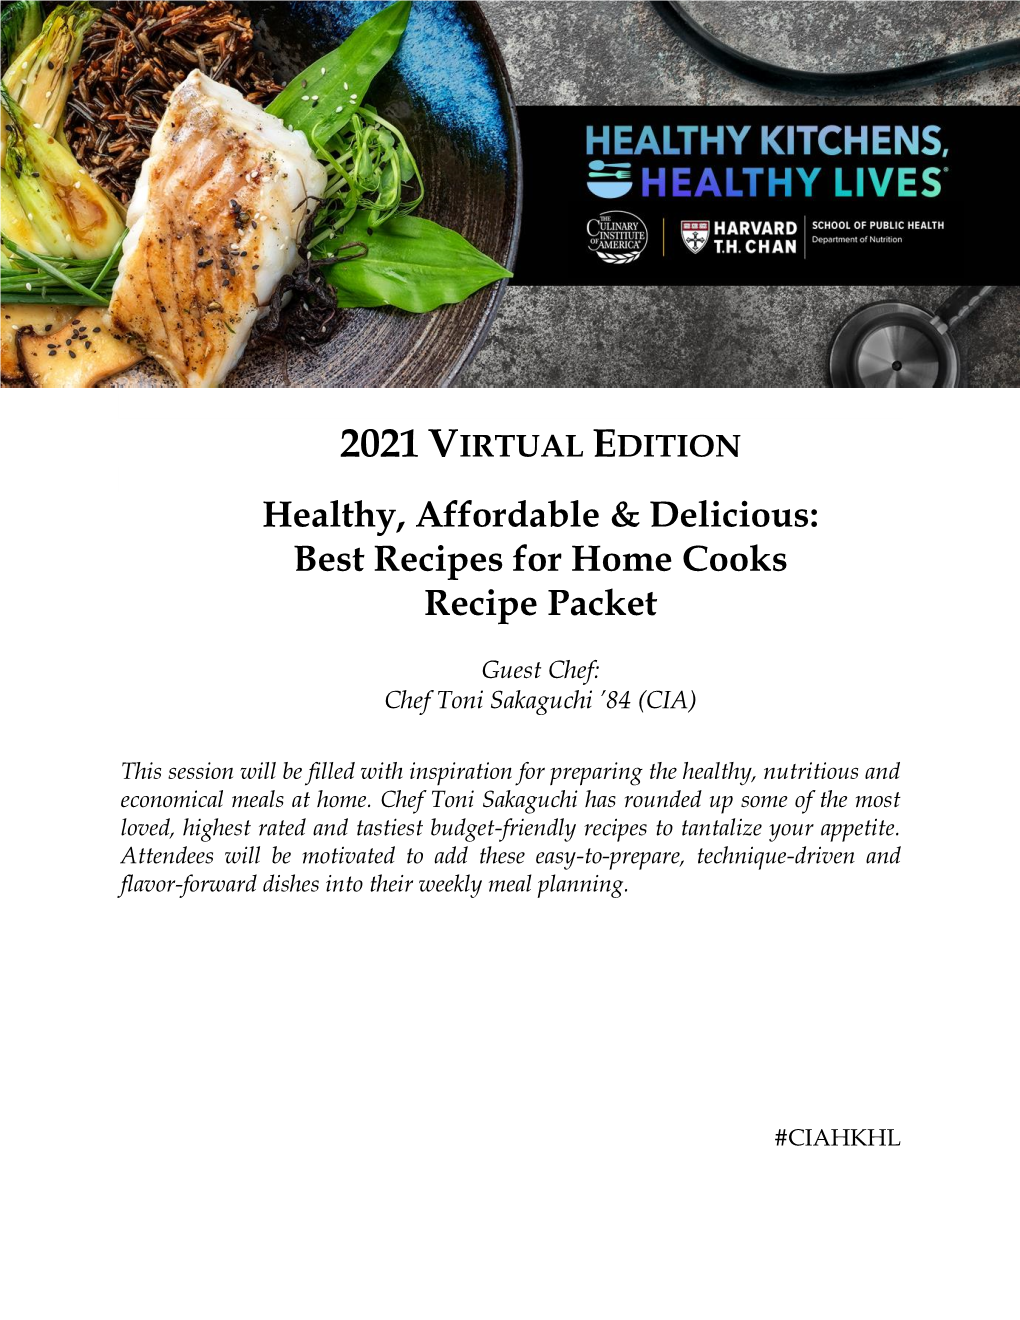 Healthy, Affordable & Delicious: Best Recipes for Home Cooks Recipe Packet